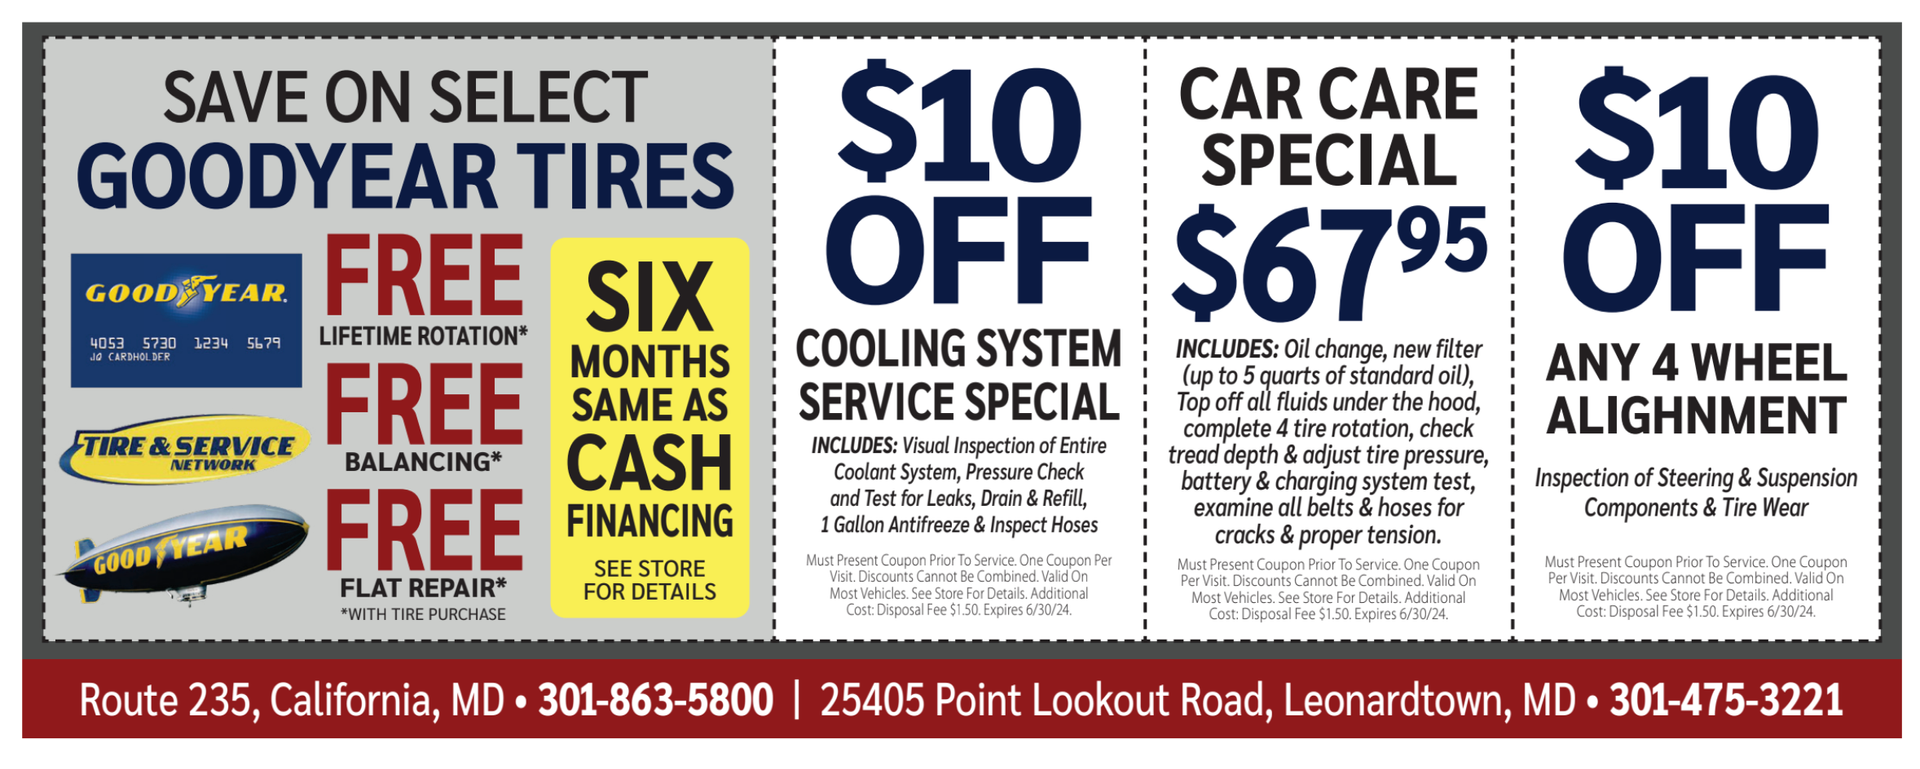 auto repair coupon for auto shop in St. Mary's county md